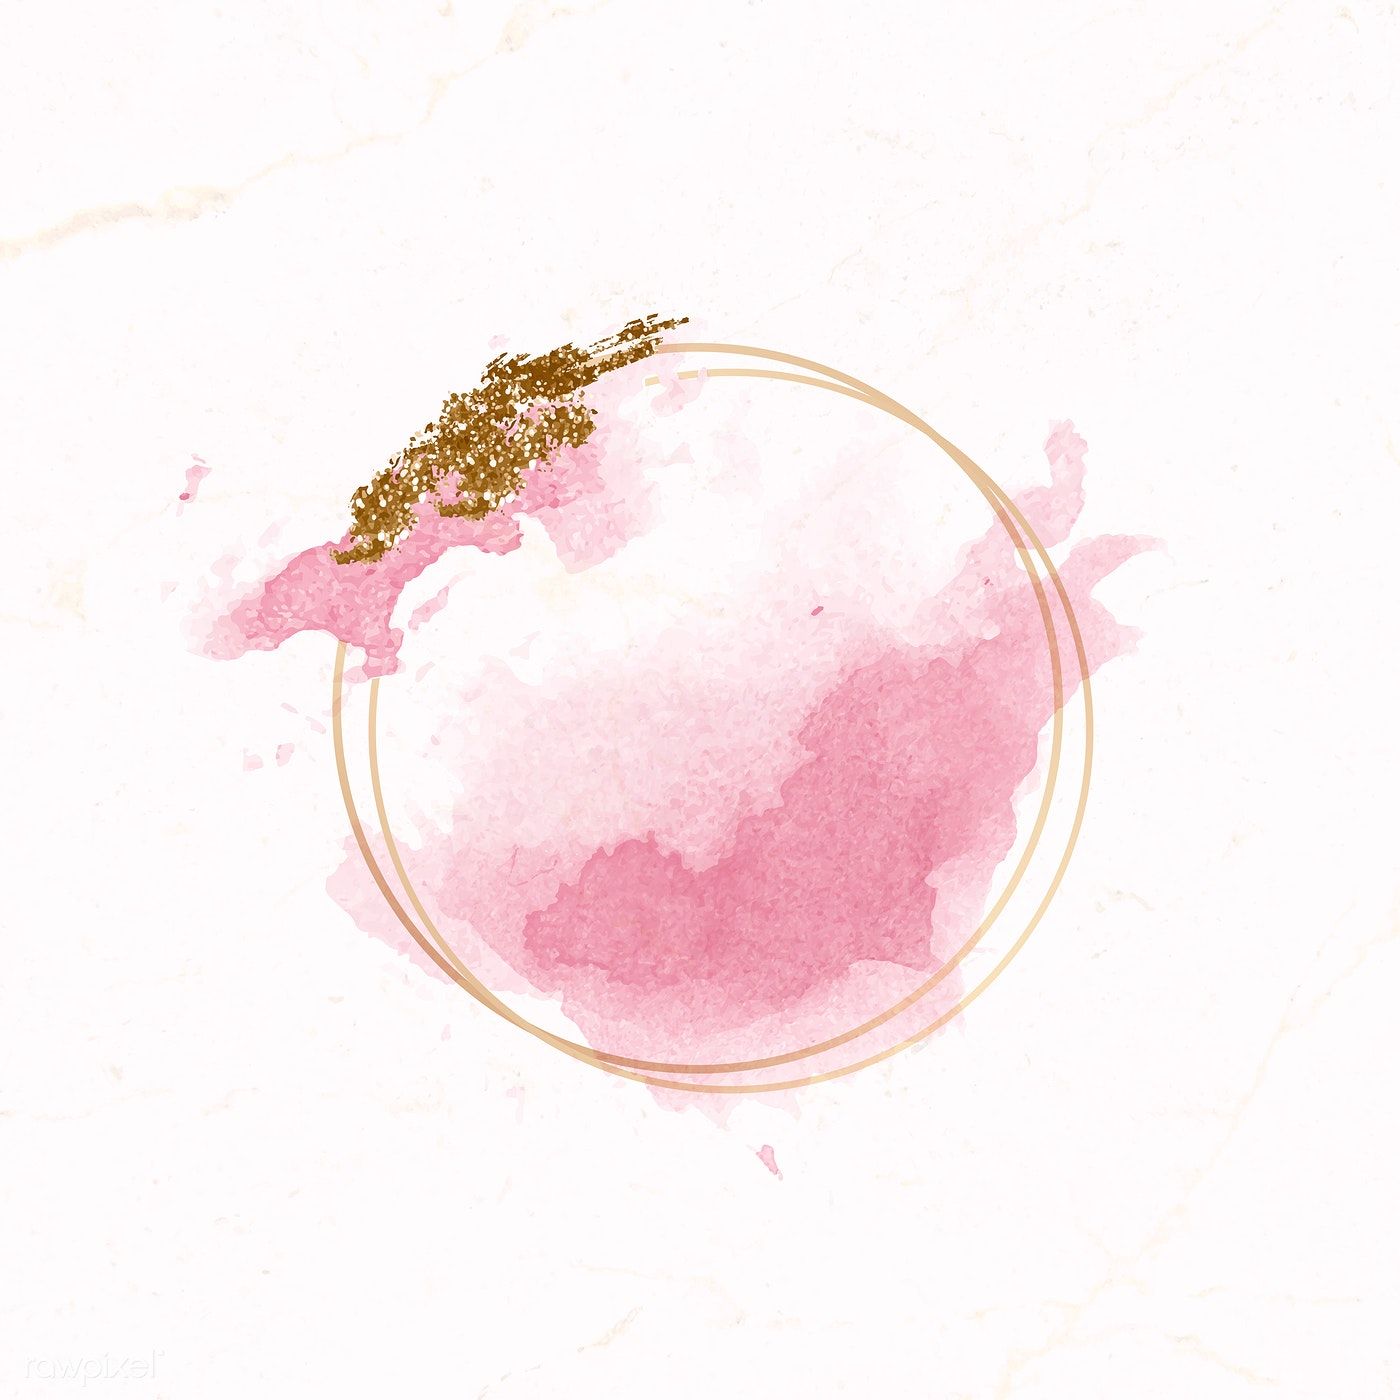 Download premium vector of Gold round frame on pink watercolor background